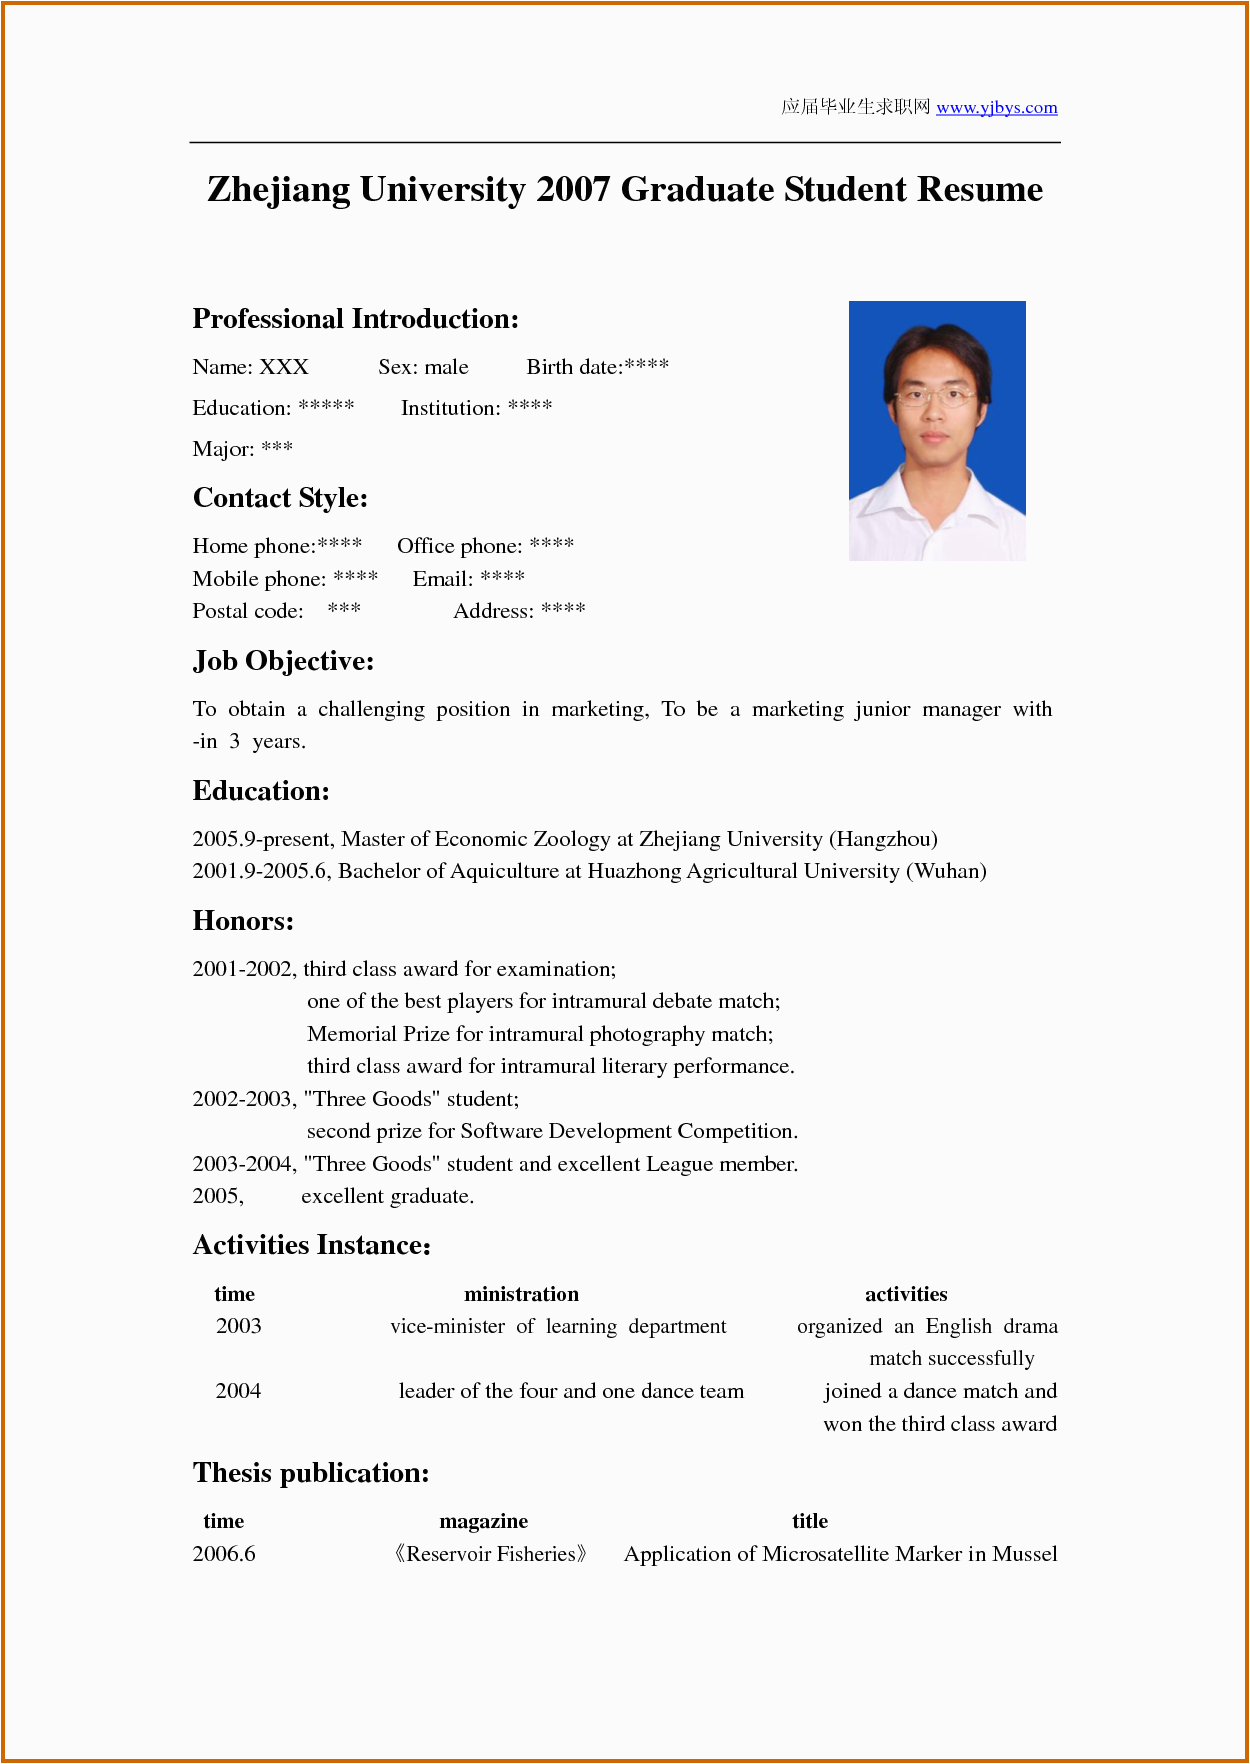 Resume Sample for University Application Fashion Design How to Write A Cv for Students Yahoo Image Search Results